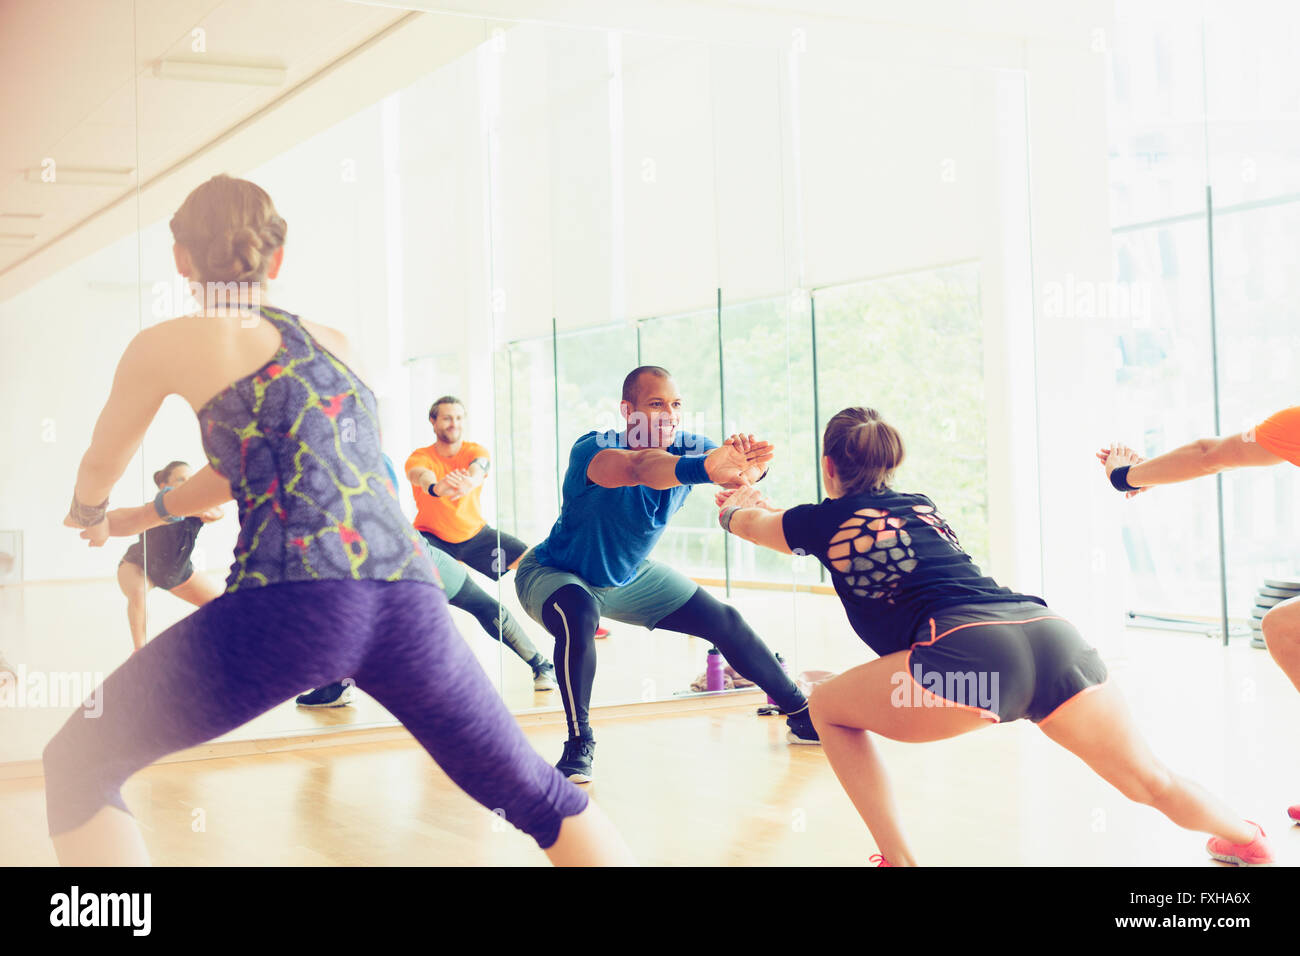 Fitness instructor leading exercise class Stock Photo